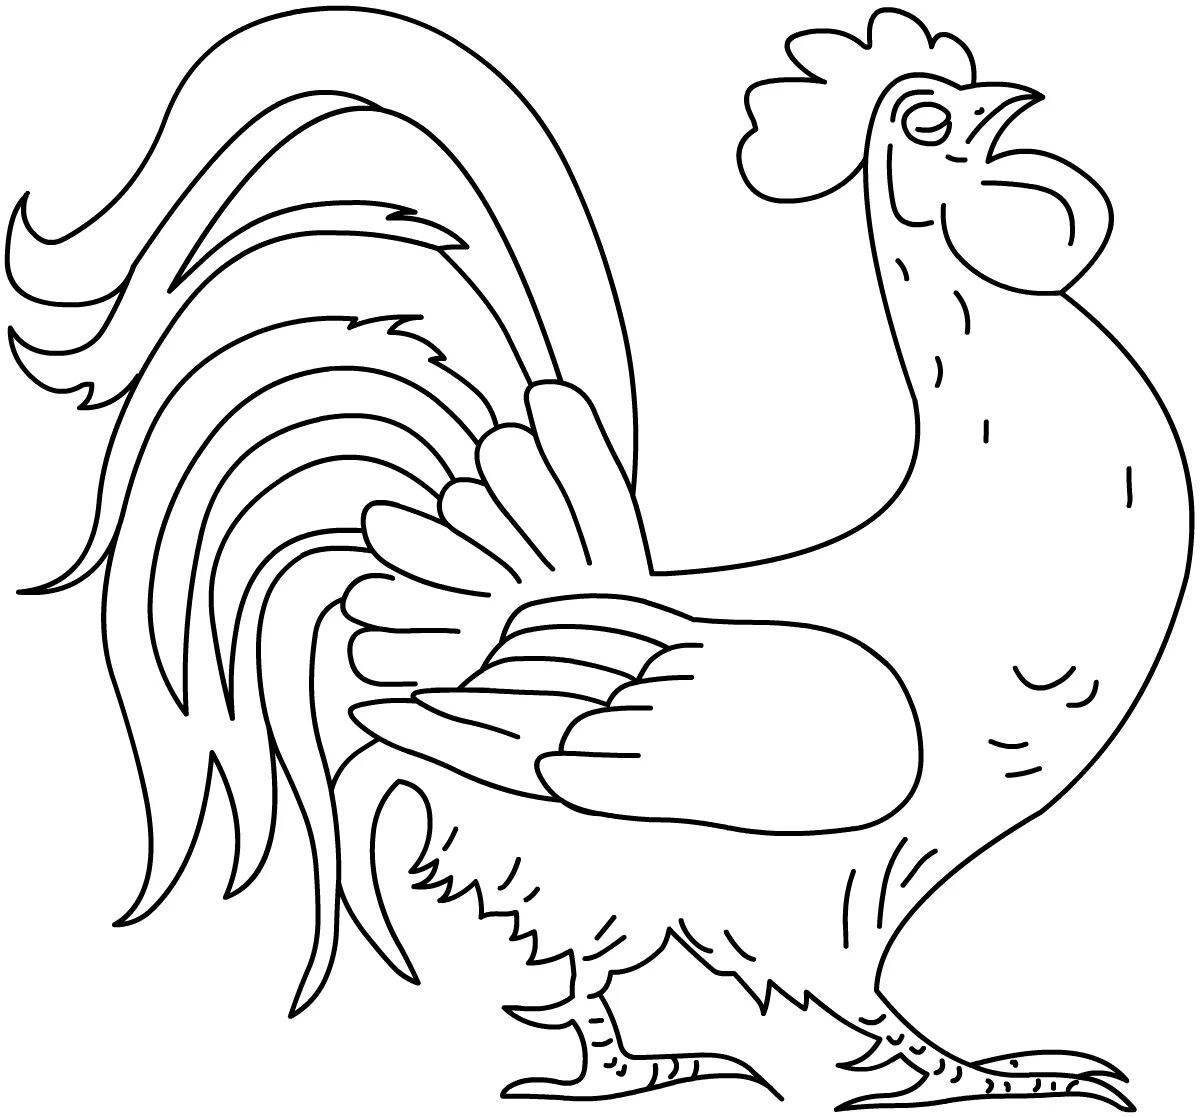 Animated drawing of a cockerel for children